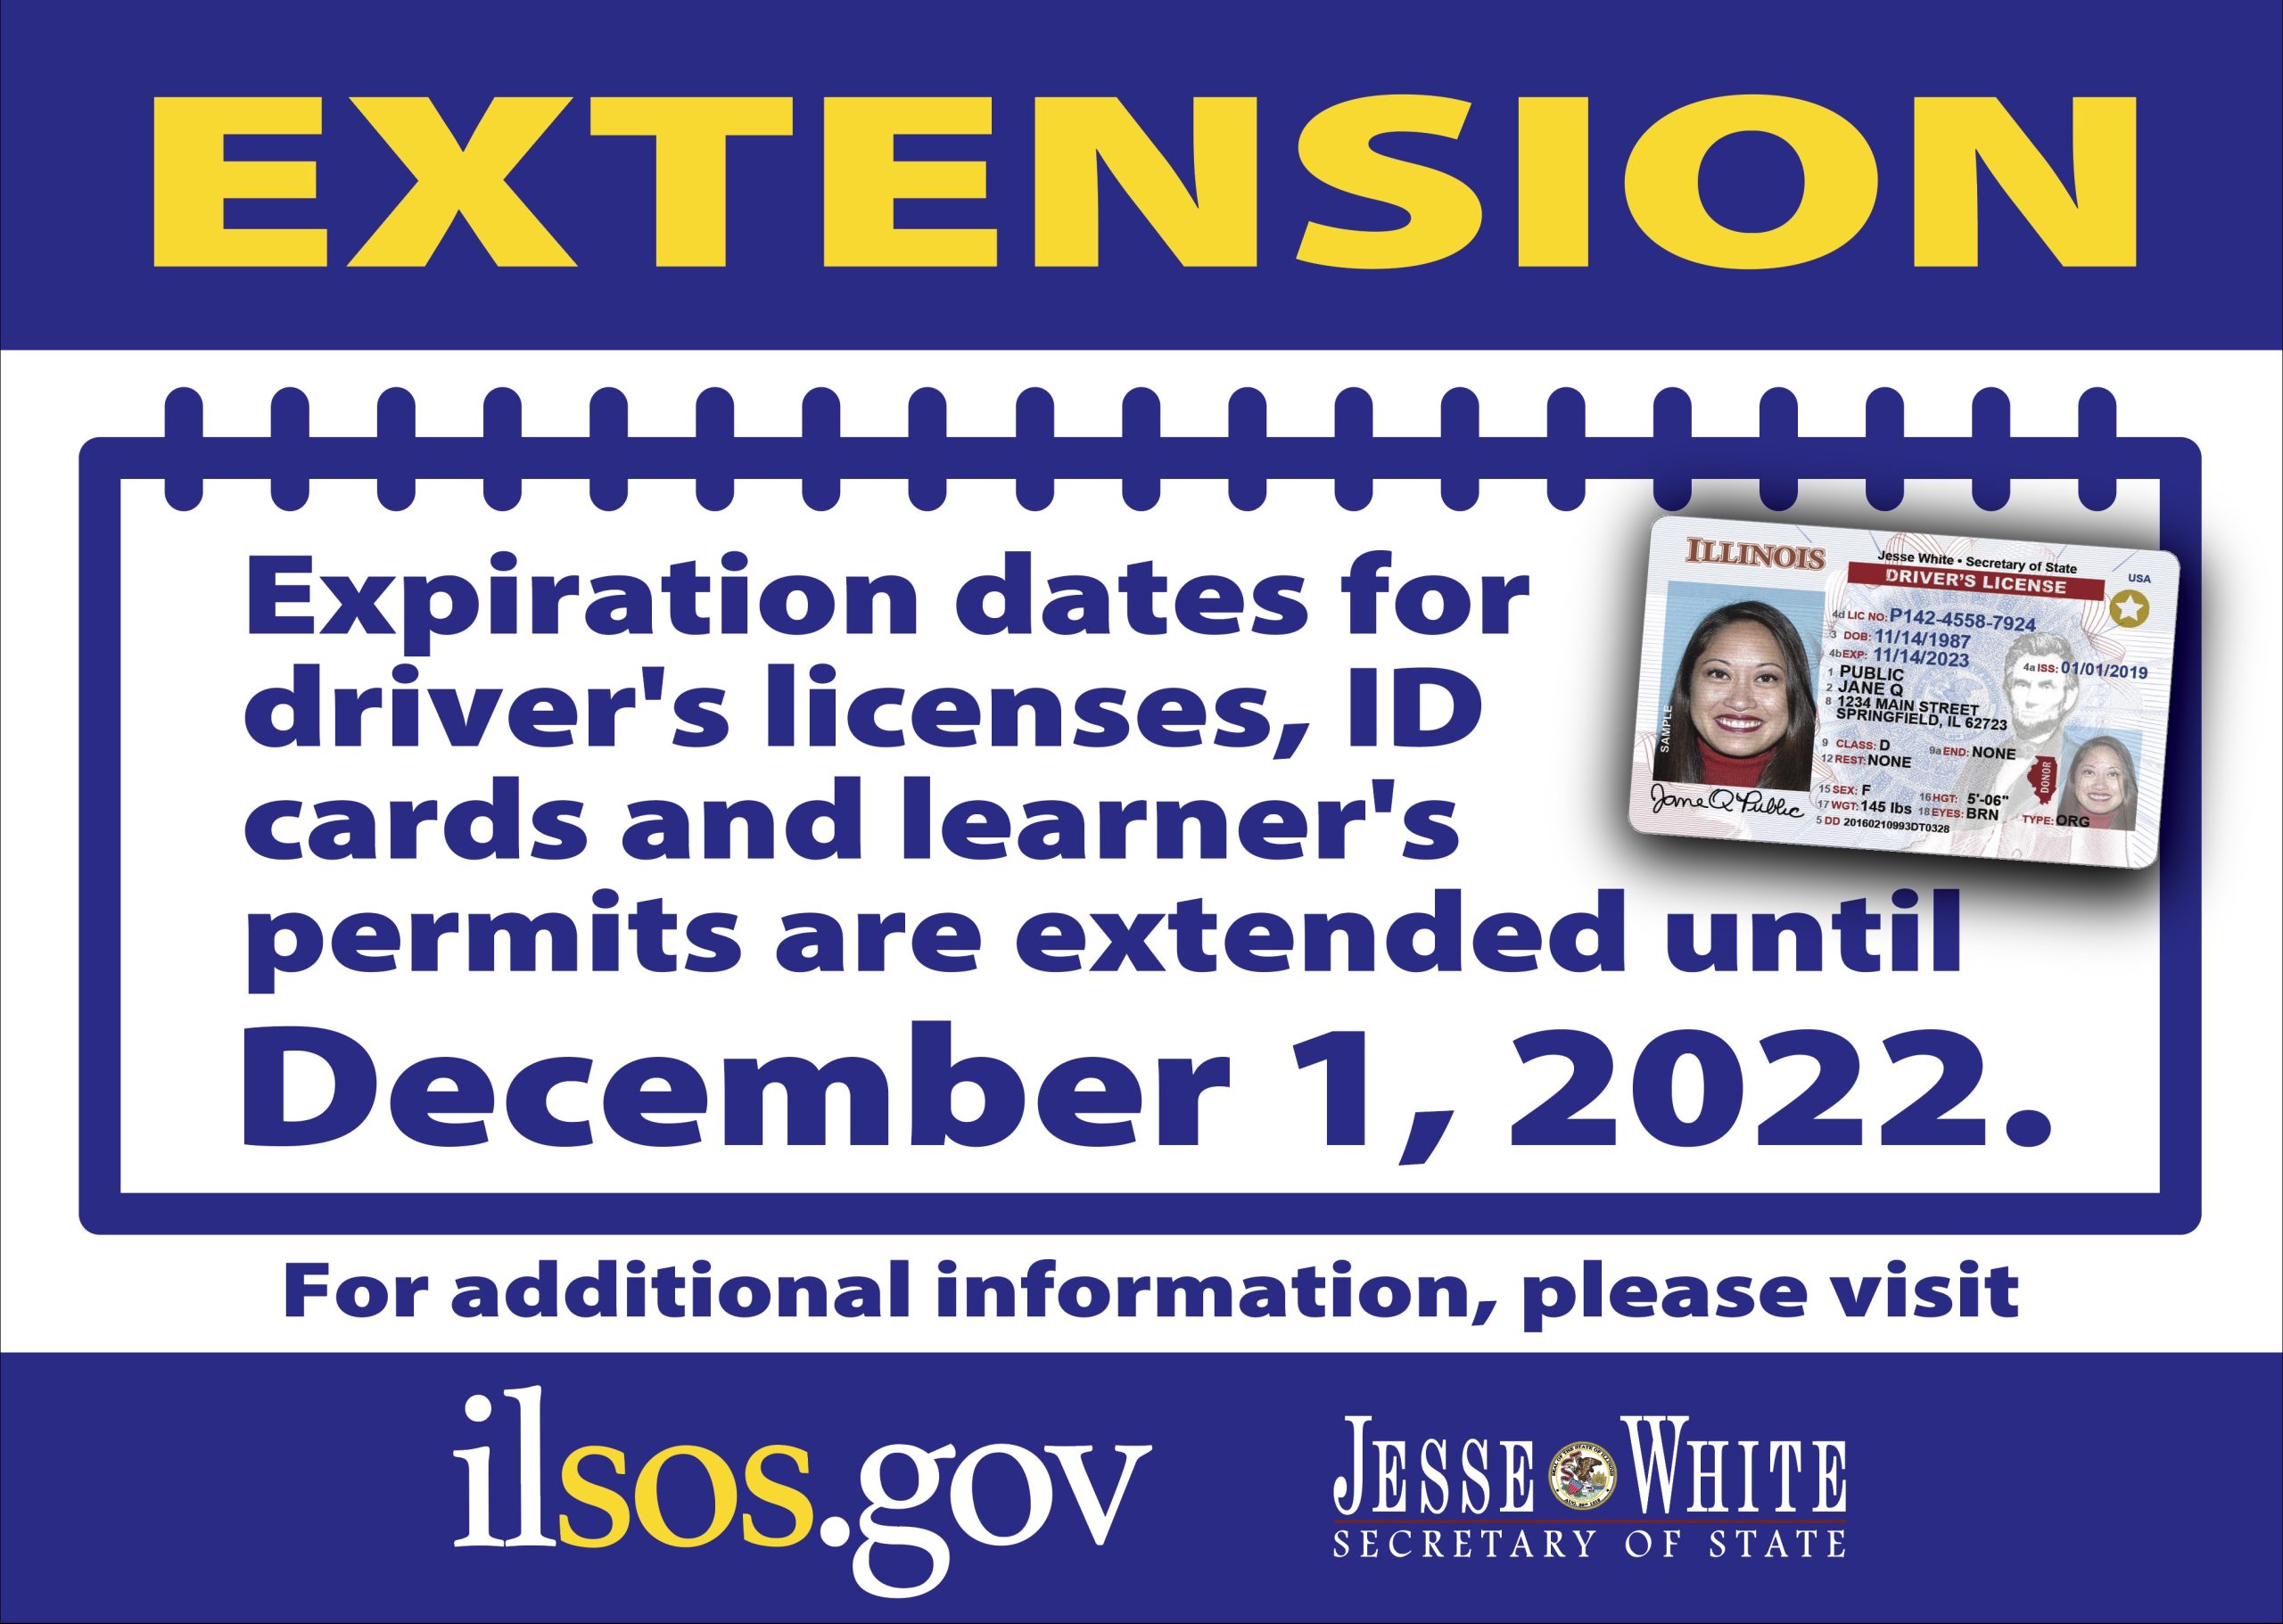 Jesse White Extending Drivers License and ID Card Expiration Dates until December 1, 2022